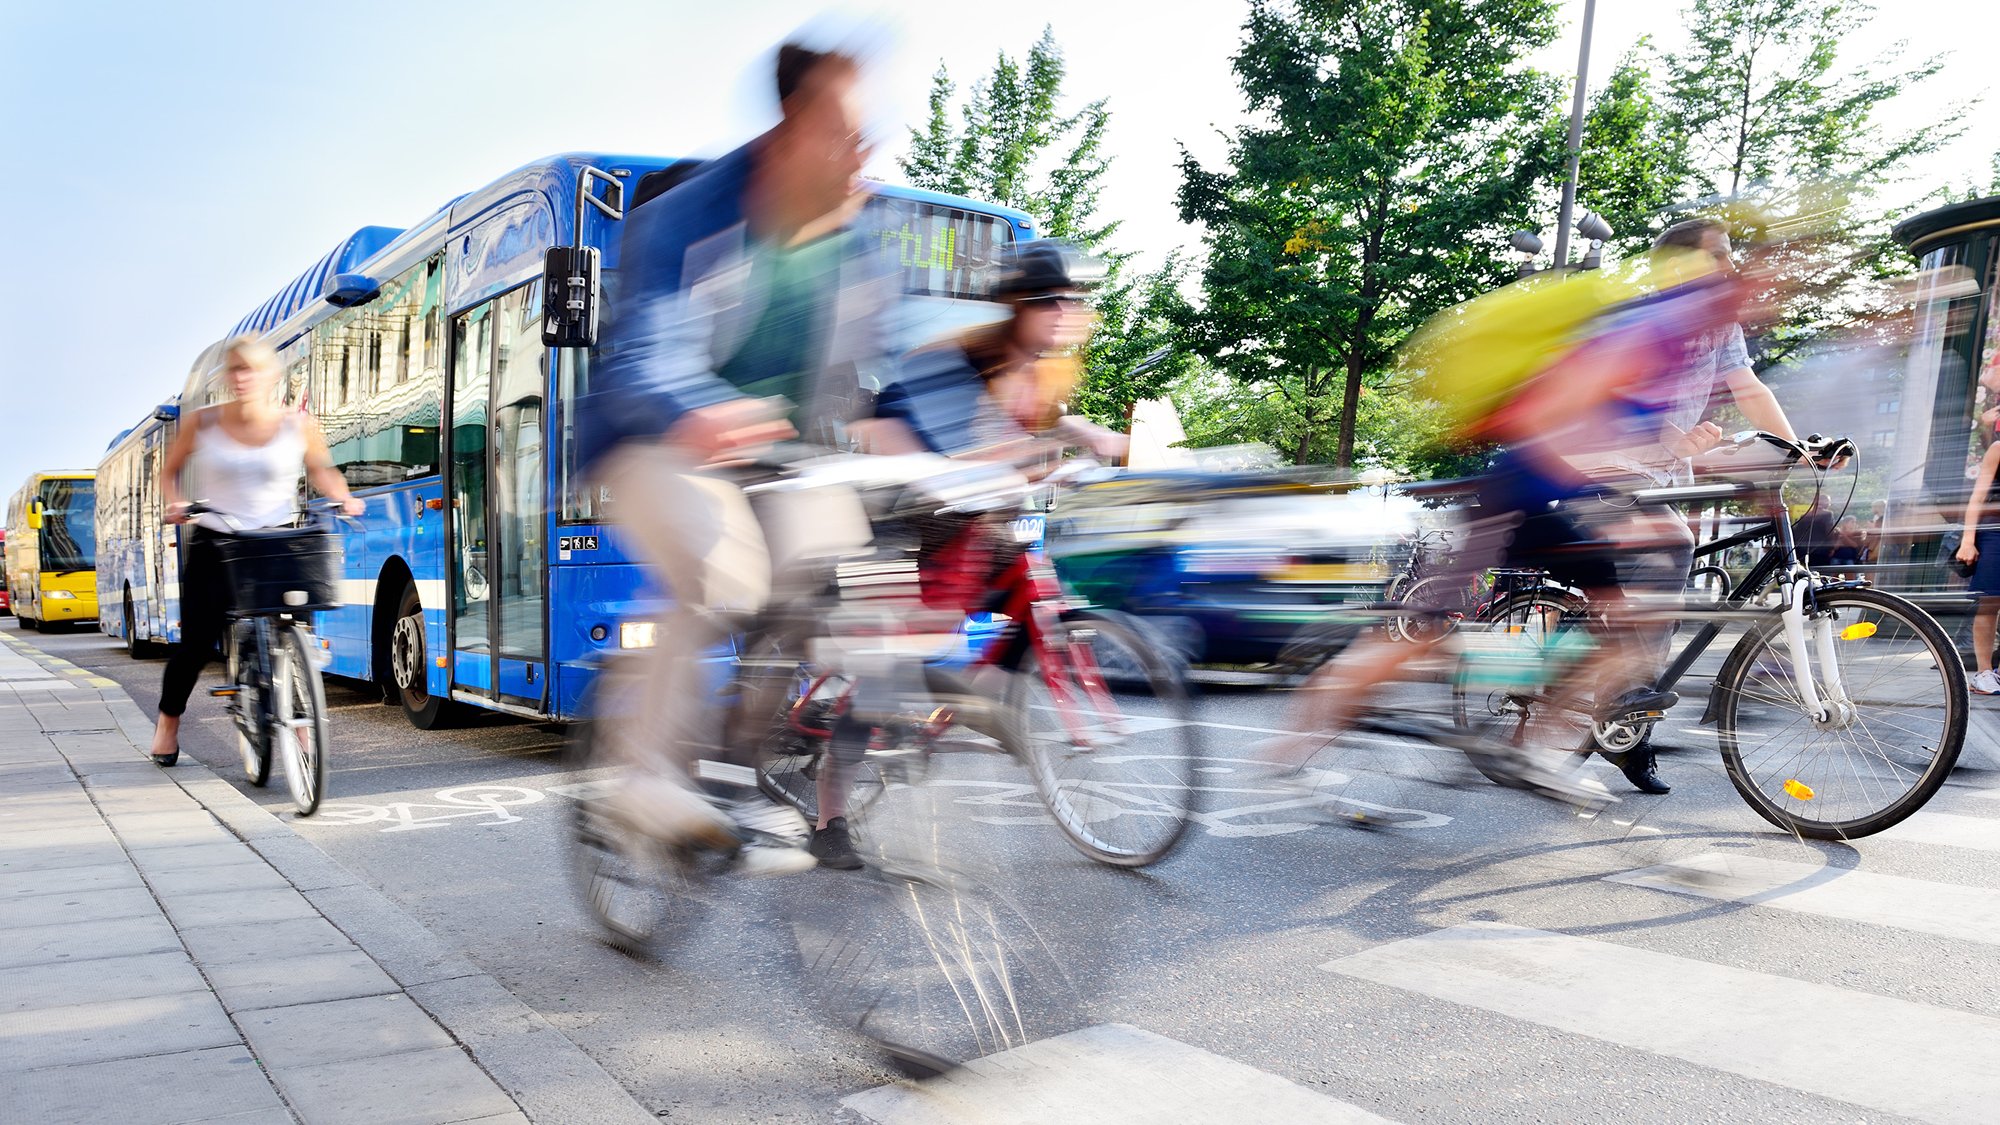 A blurred image of people riding bikes in front of a row of buses on a sunny day